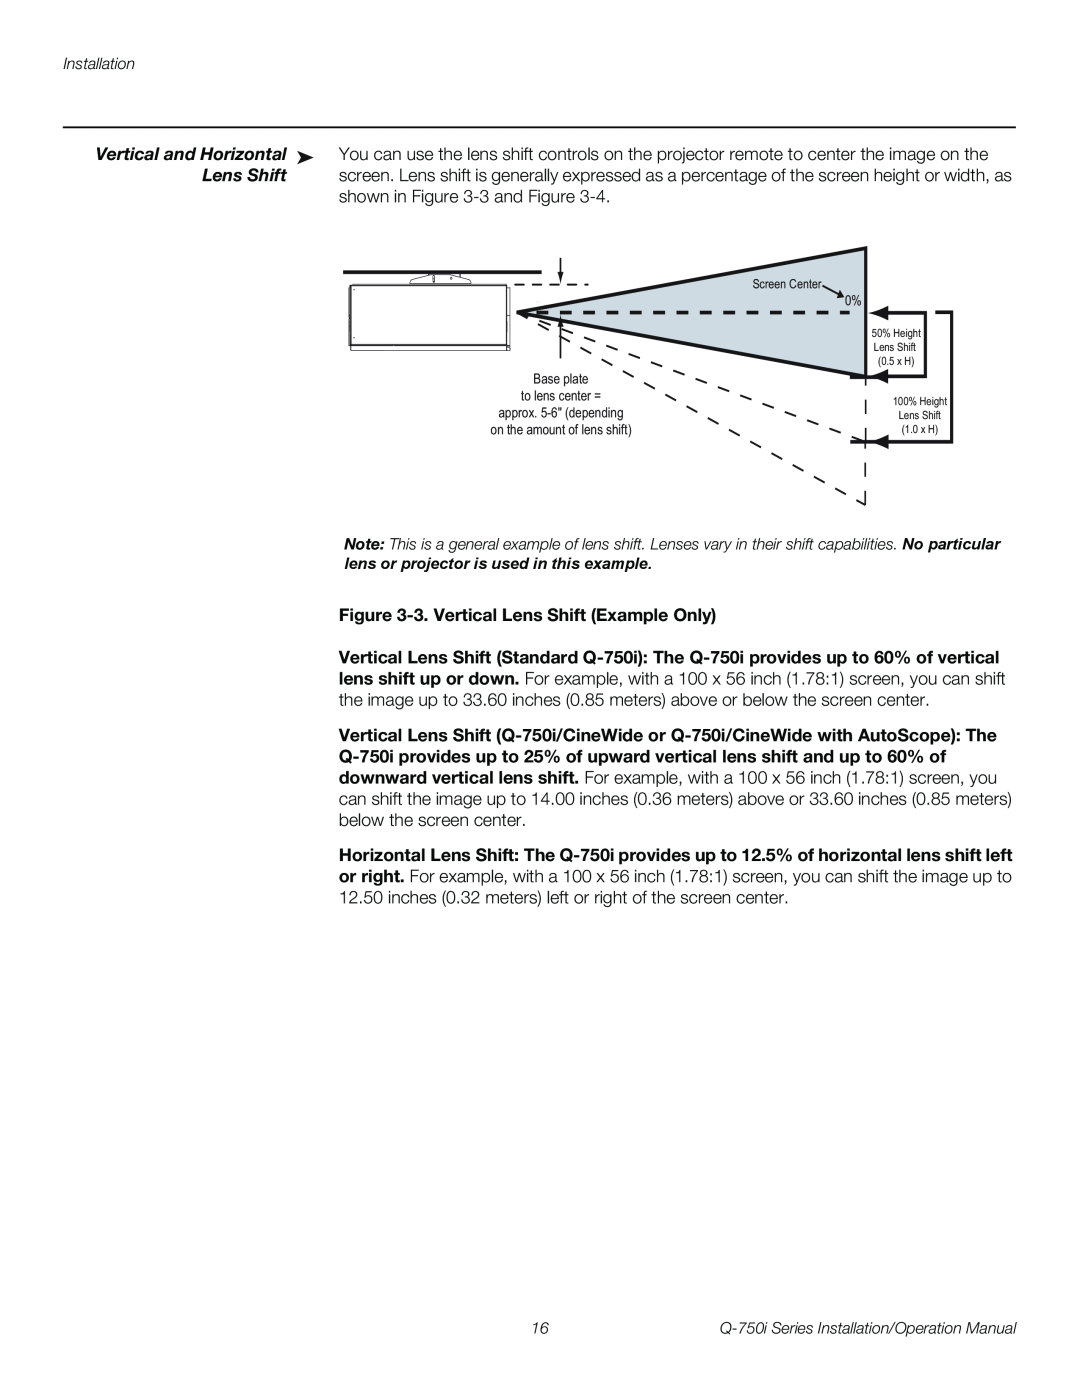 Runco Q-750I operation manual Vertical and Horizontal, 3.Vertical Lens Shift Example Only 